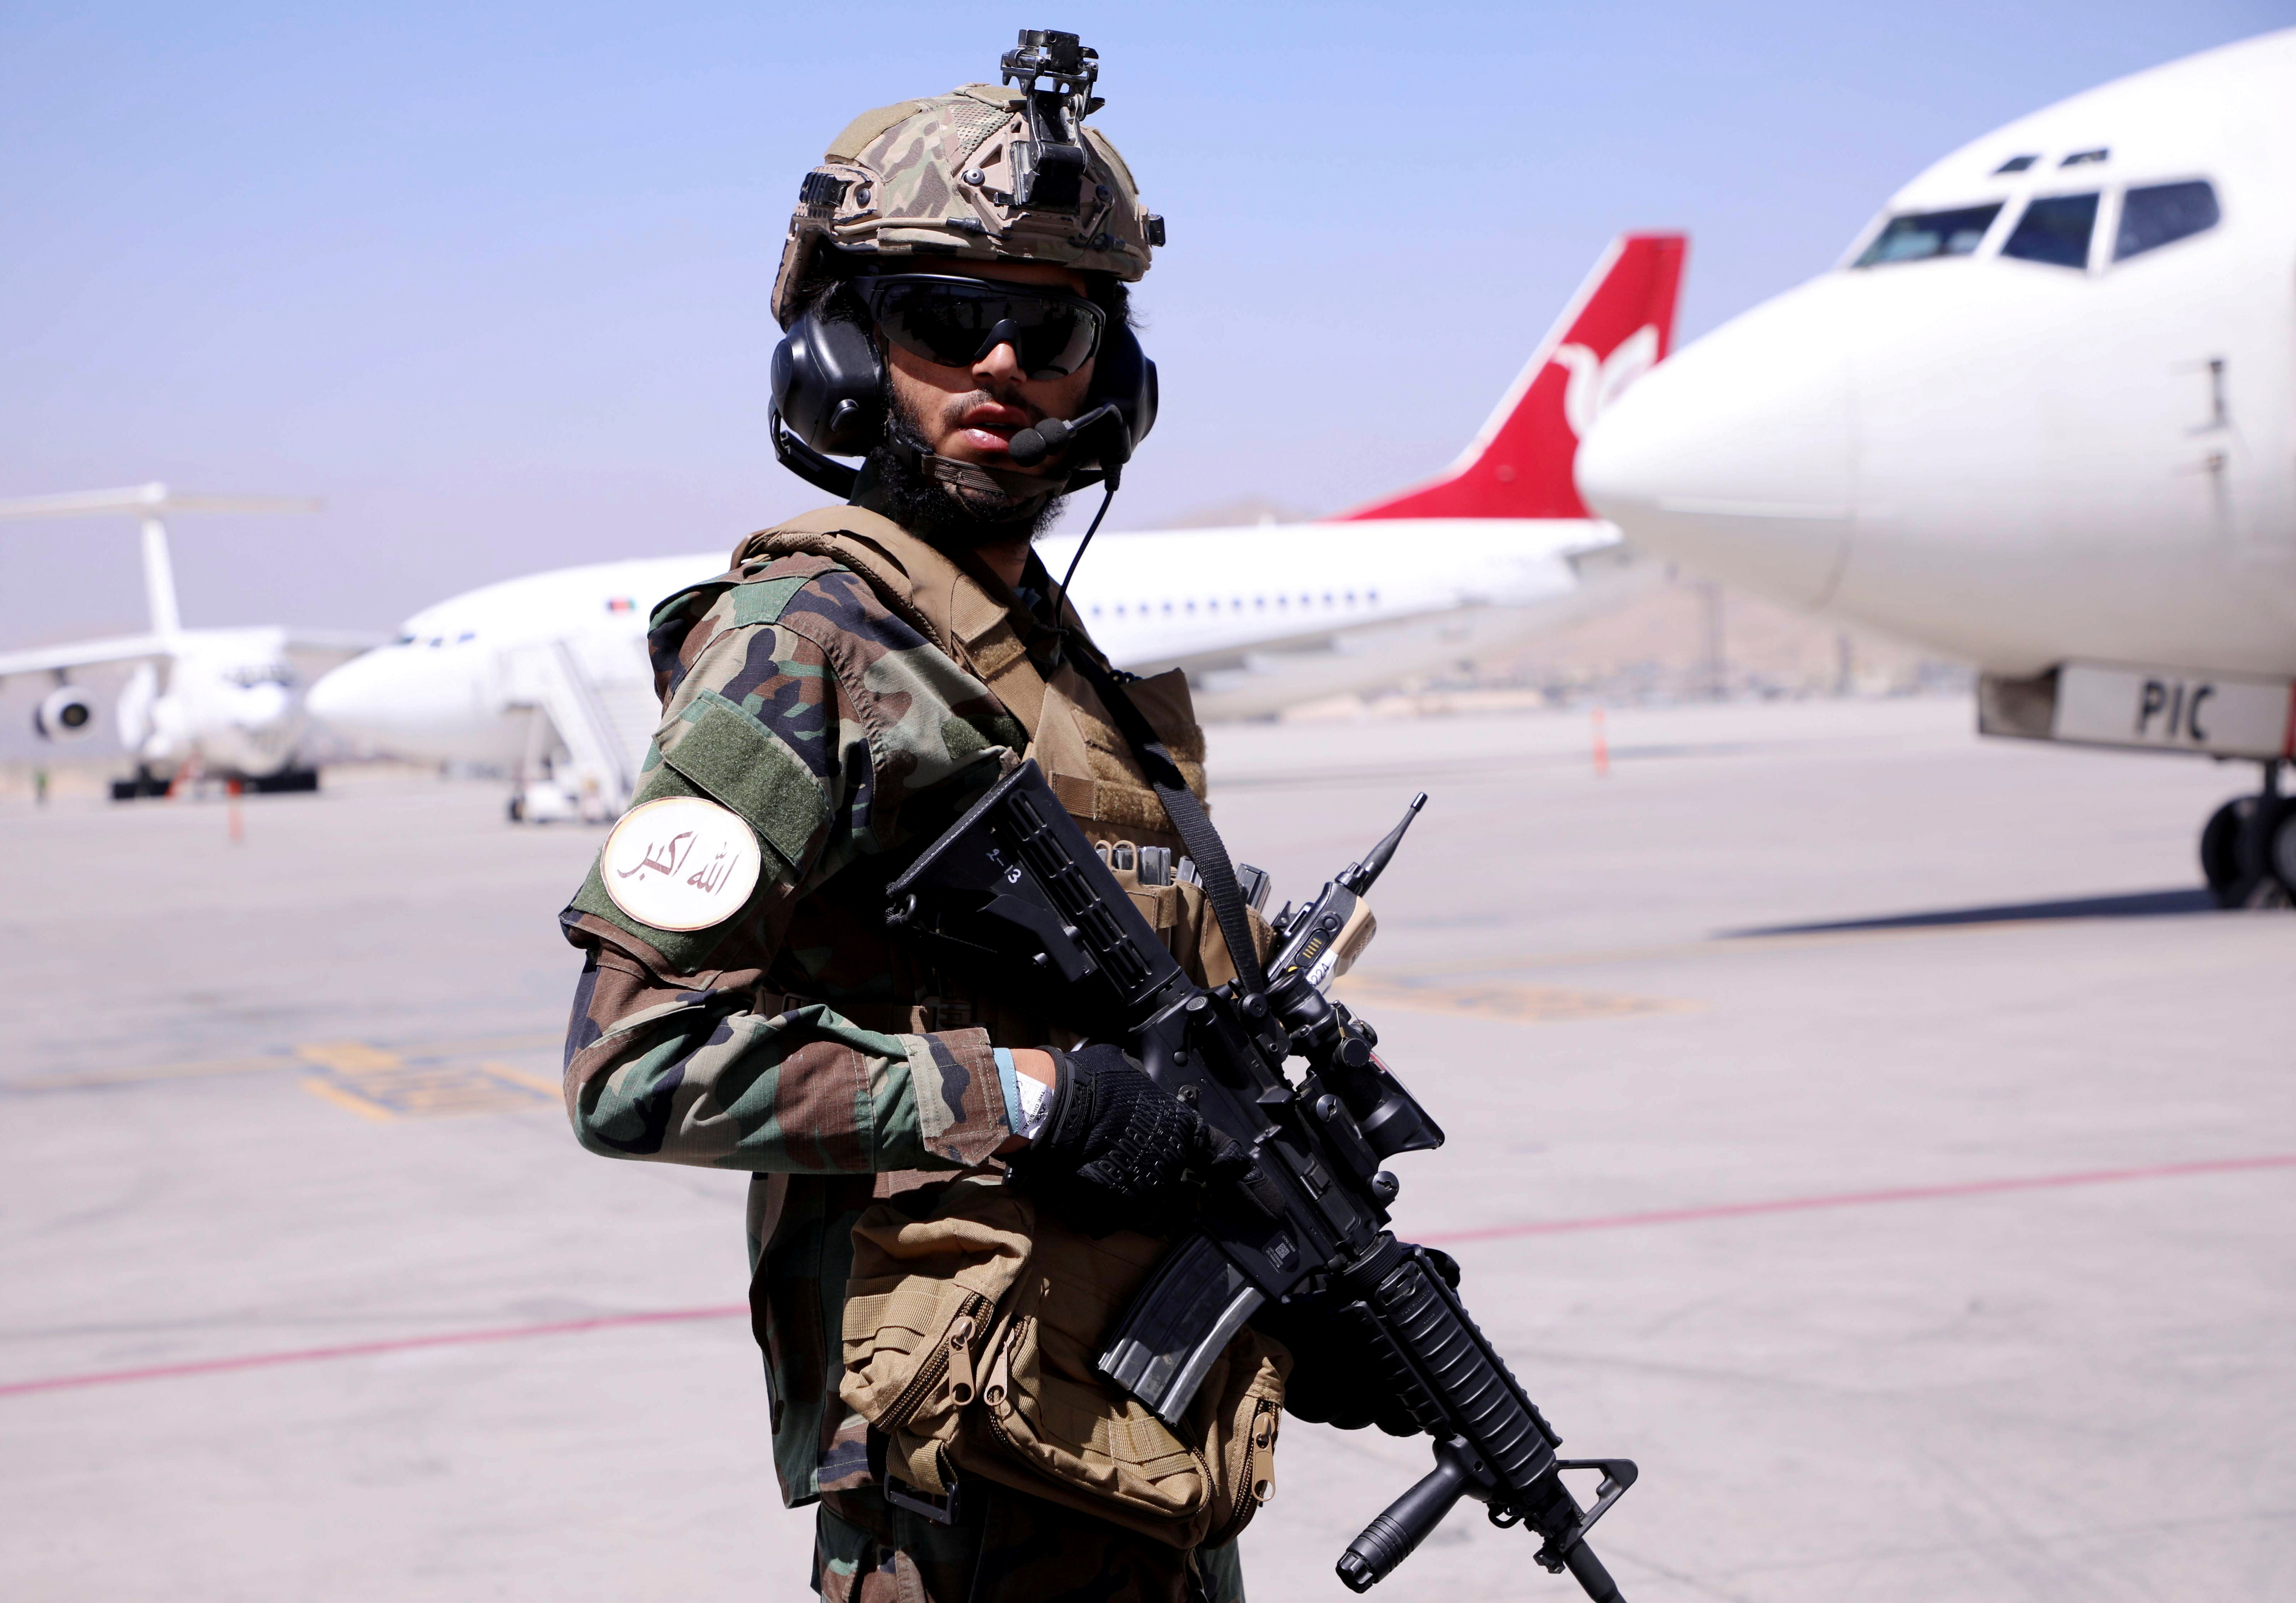 A member of Taliban forces stands guard at Hamid Karzai International Airport in Kabul, Afghanistan September 5, 2021. REUTERS/Stringer/File Photo